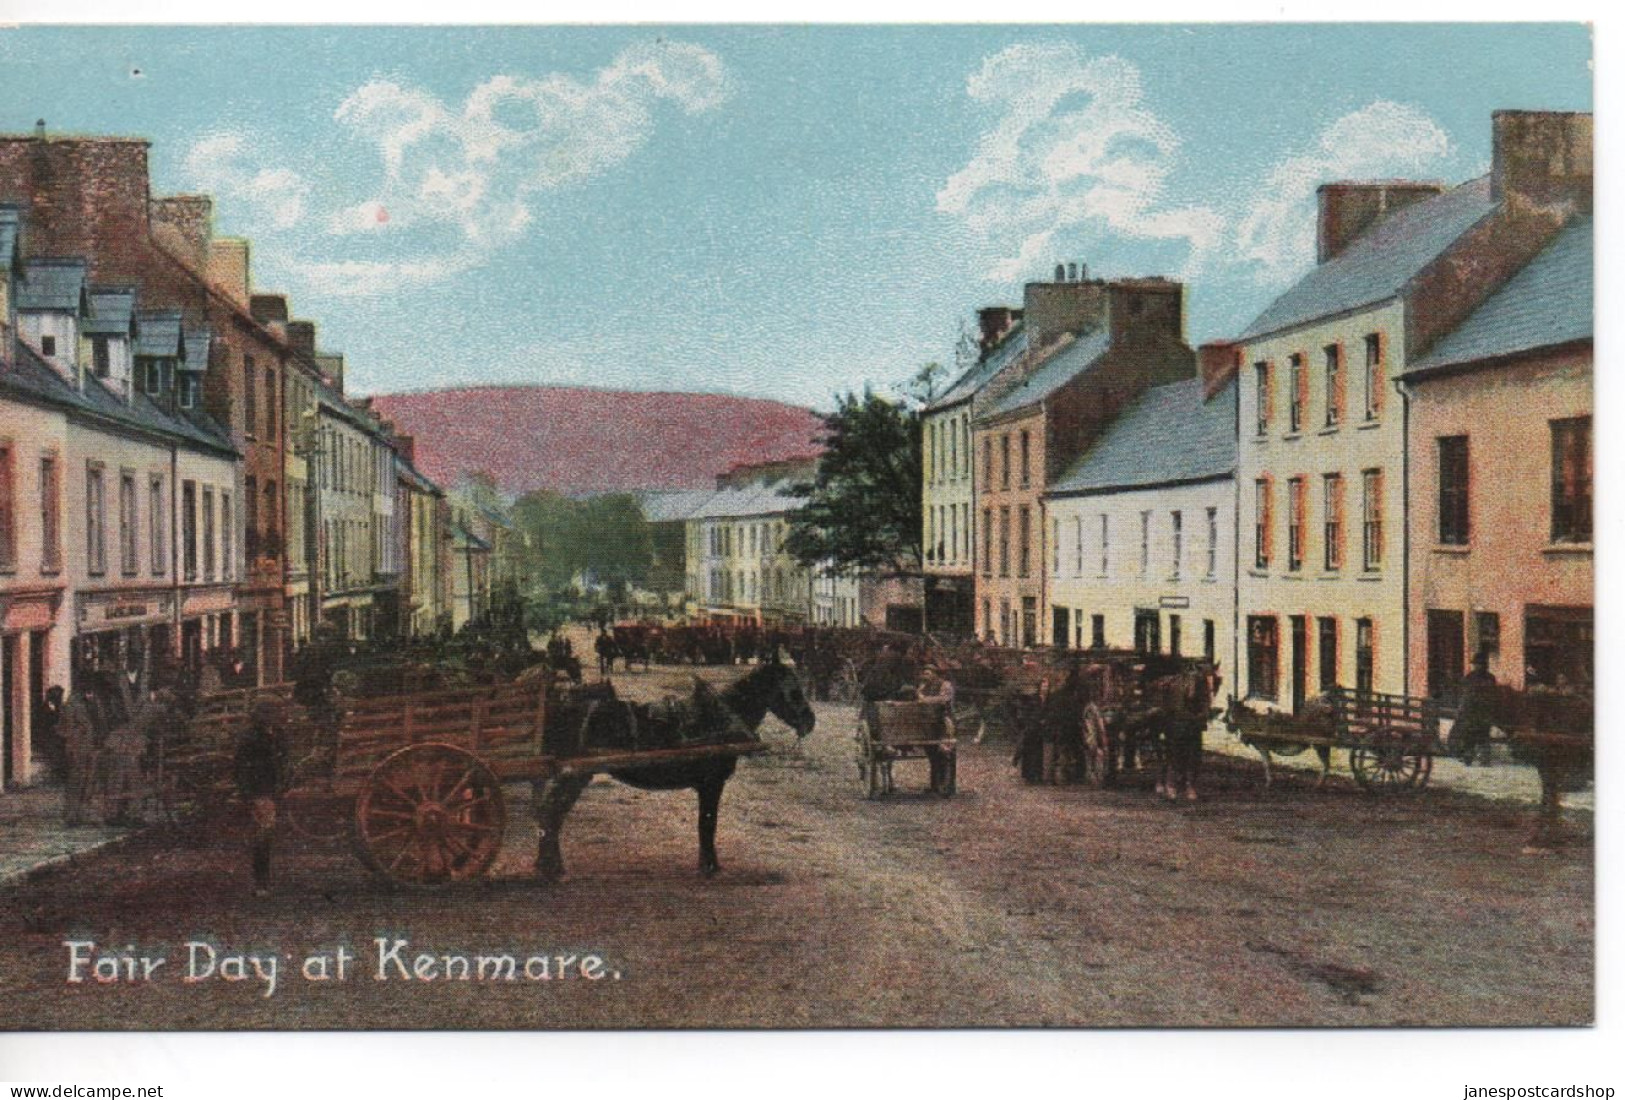 COLOURED POSTCARD - FAIR DAY AT KENMARE - COUNTY WATERFORD - Waterford